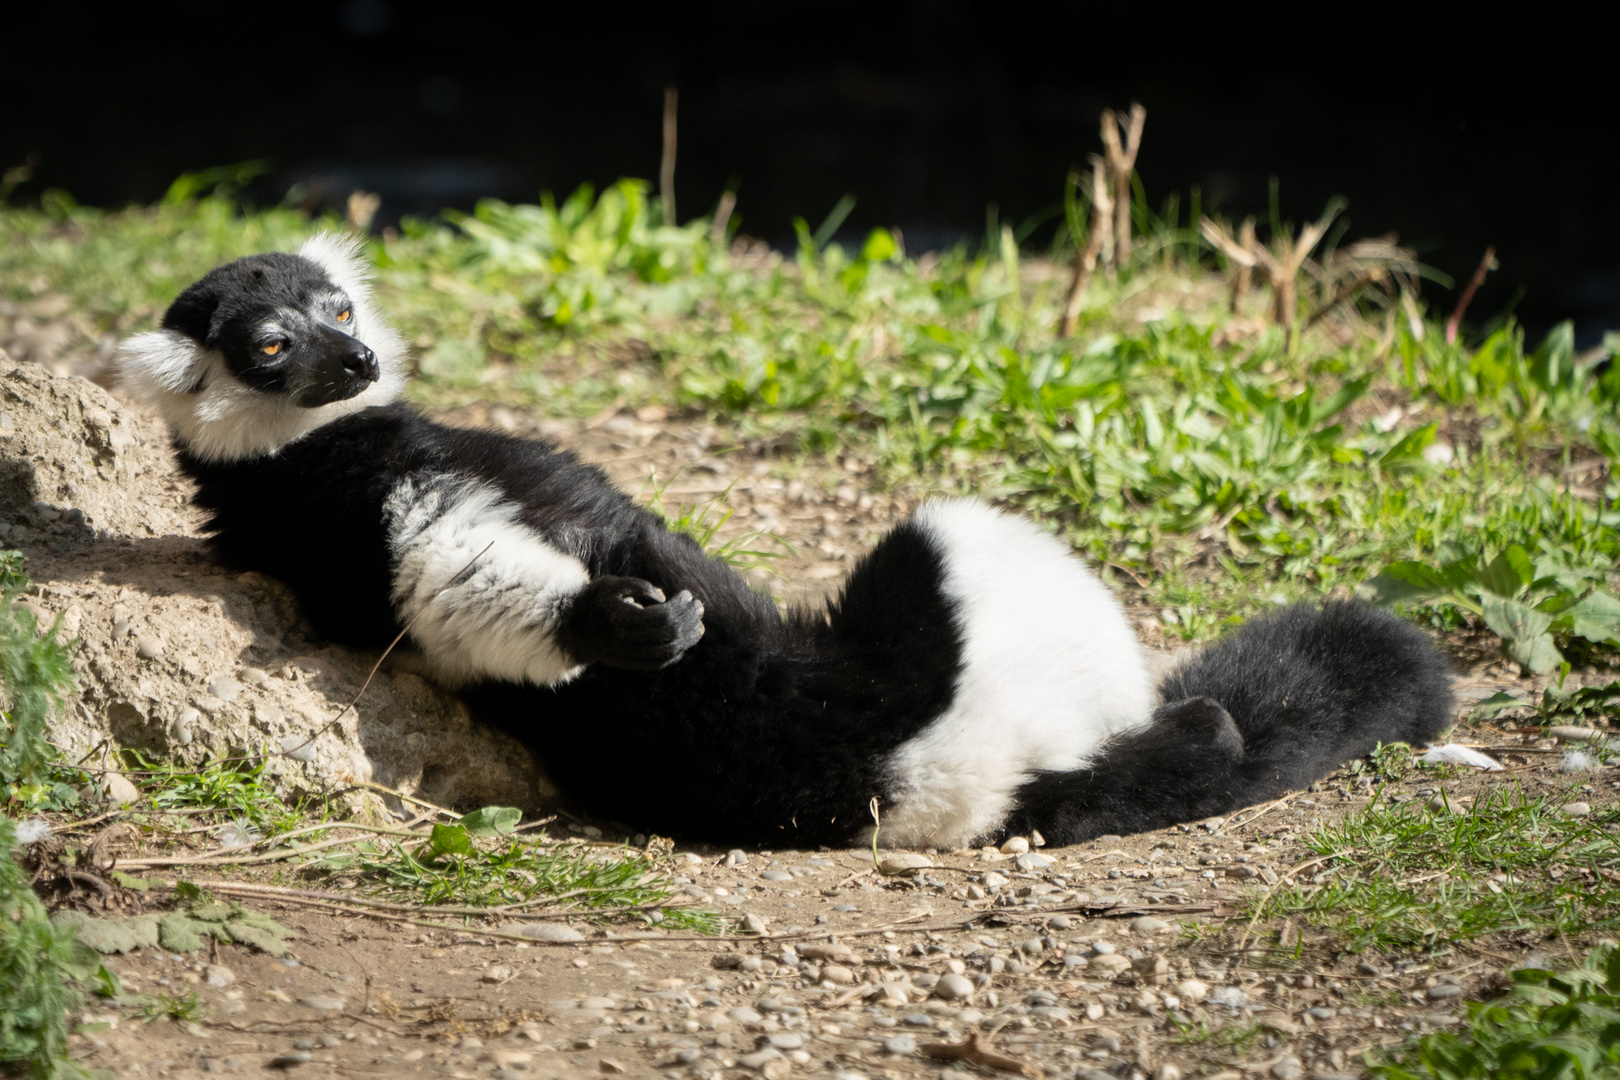 do it like the Lemur - just chillin and stay cool